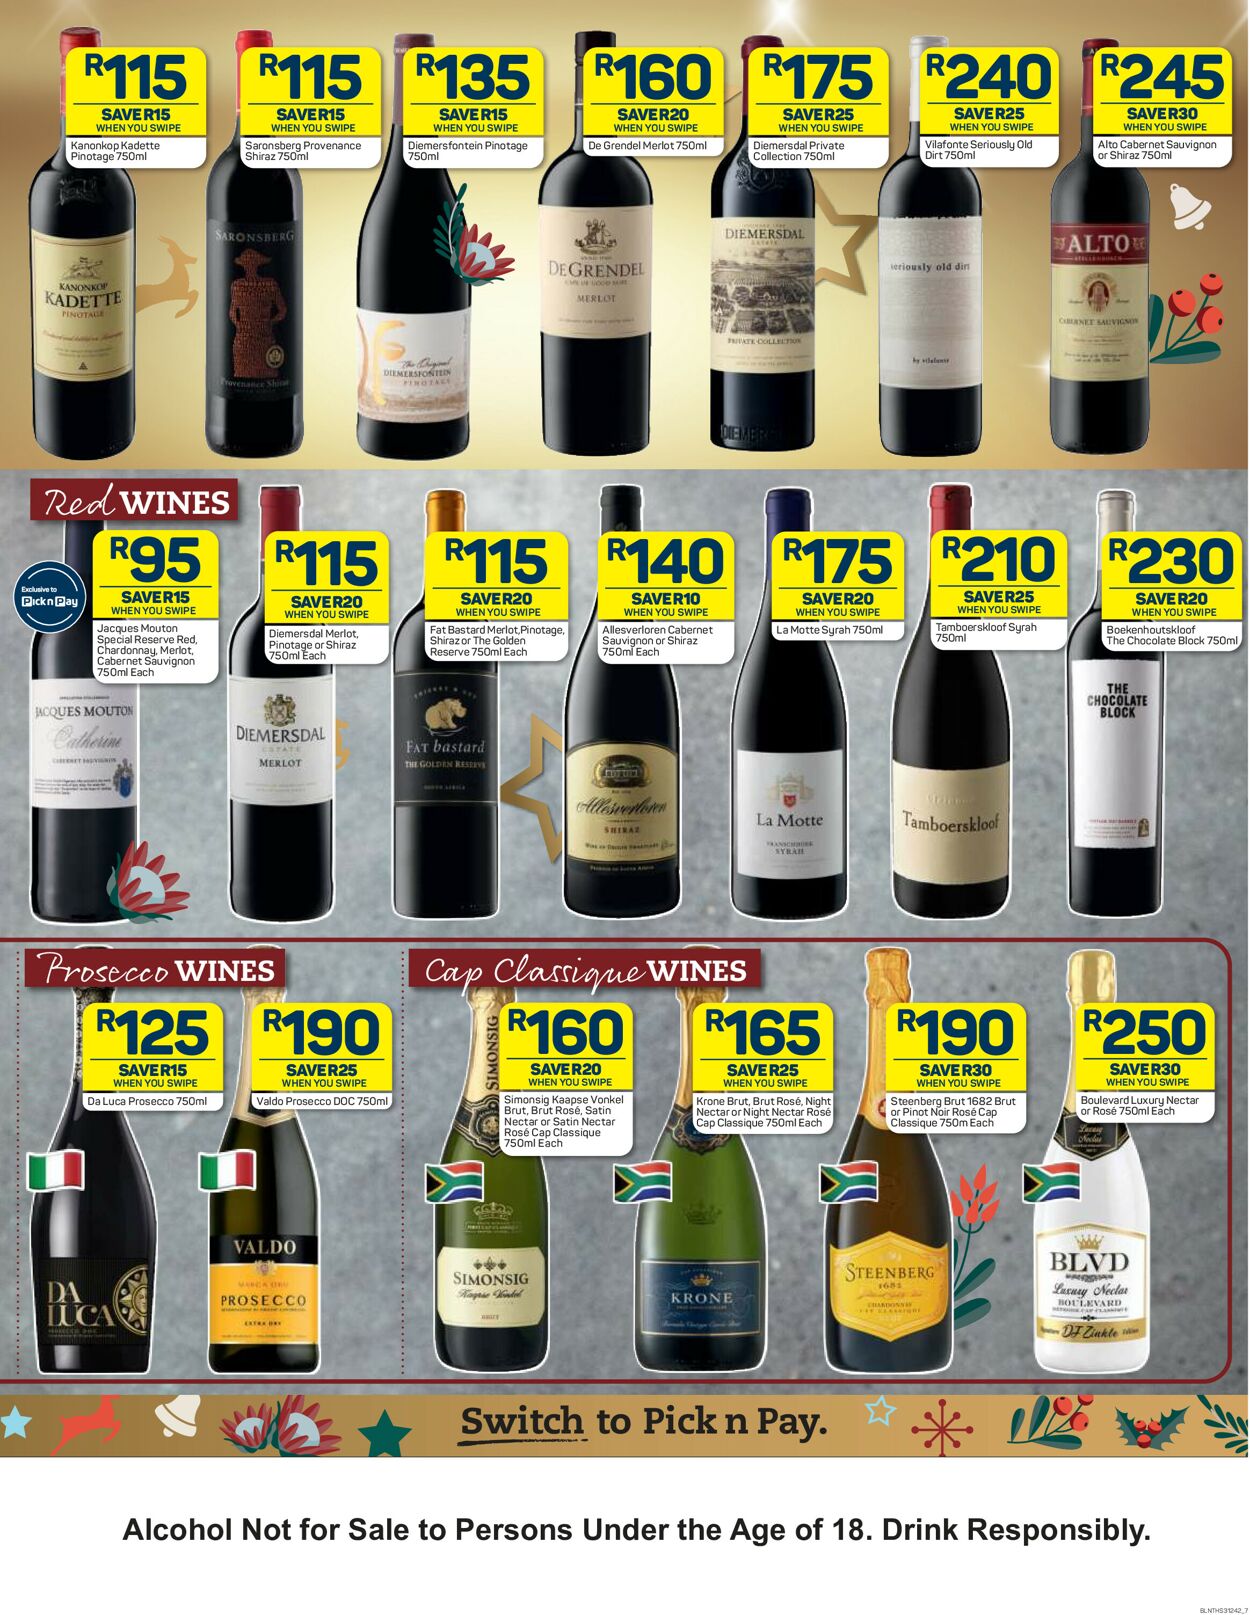 Pick n Pay Catalogue - 2022/10/24-2022/11/06 (Page 7)